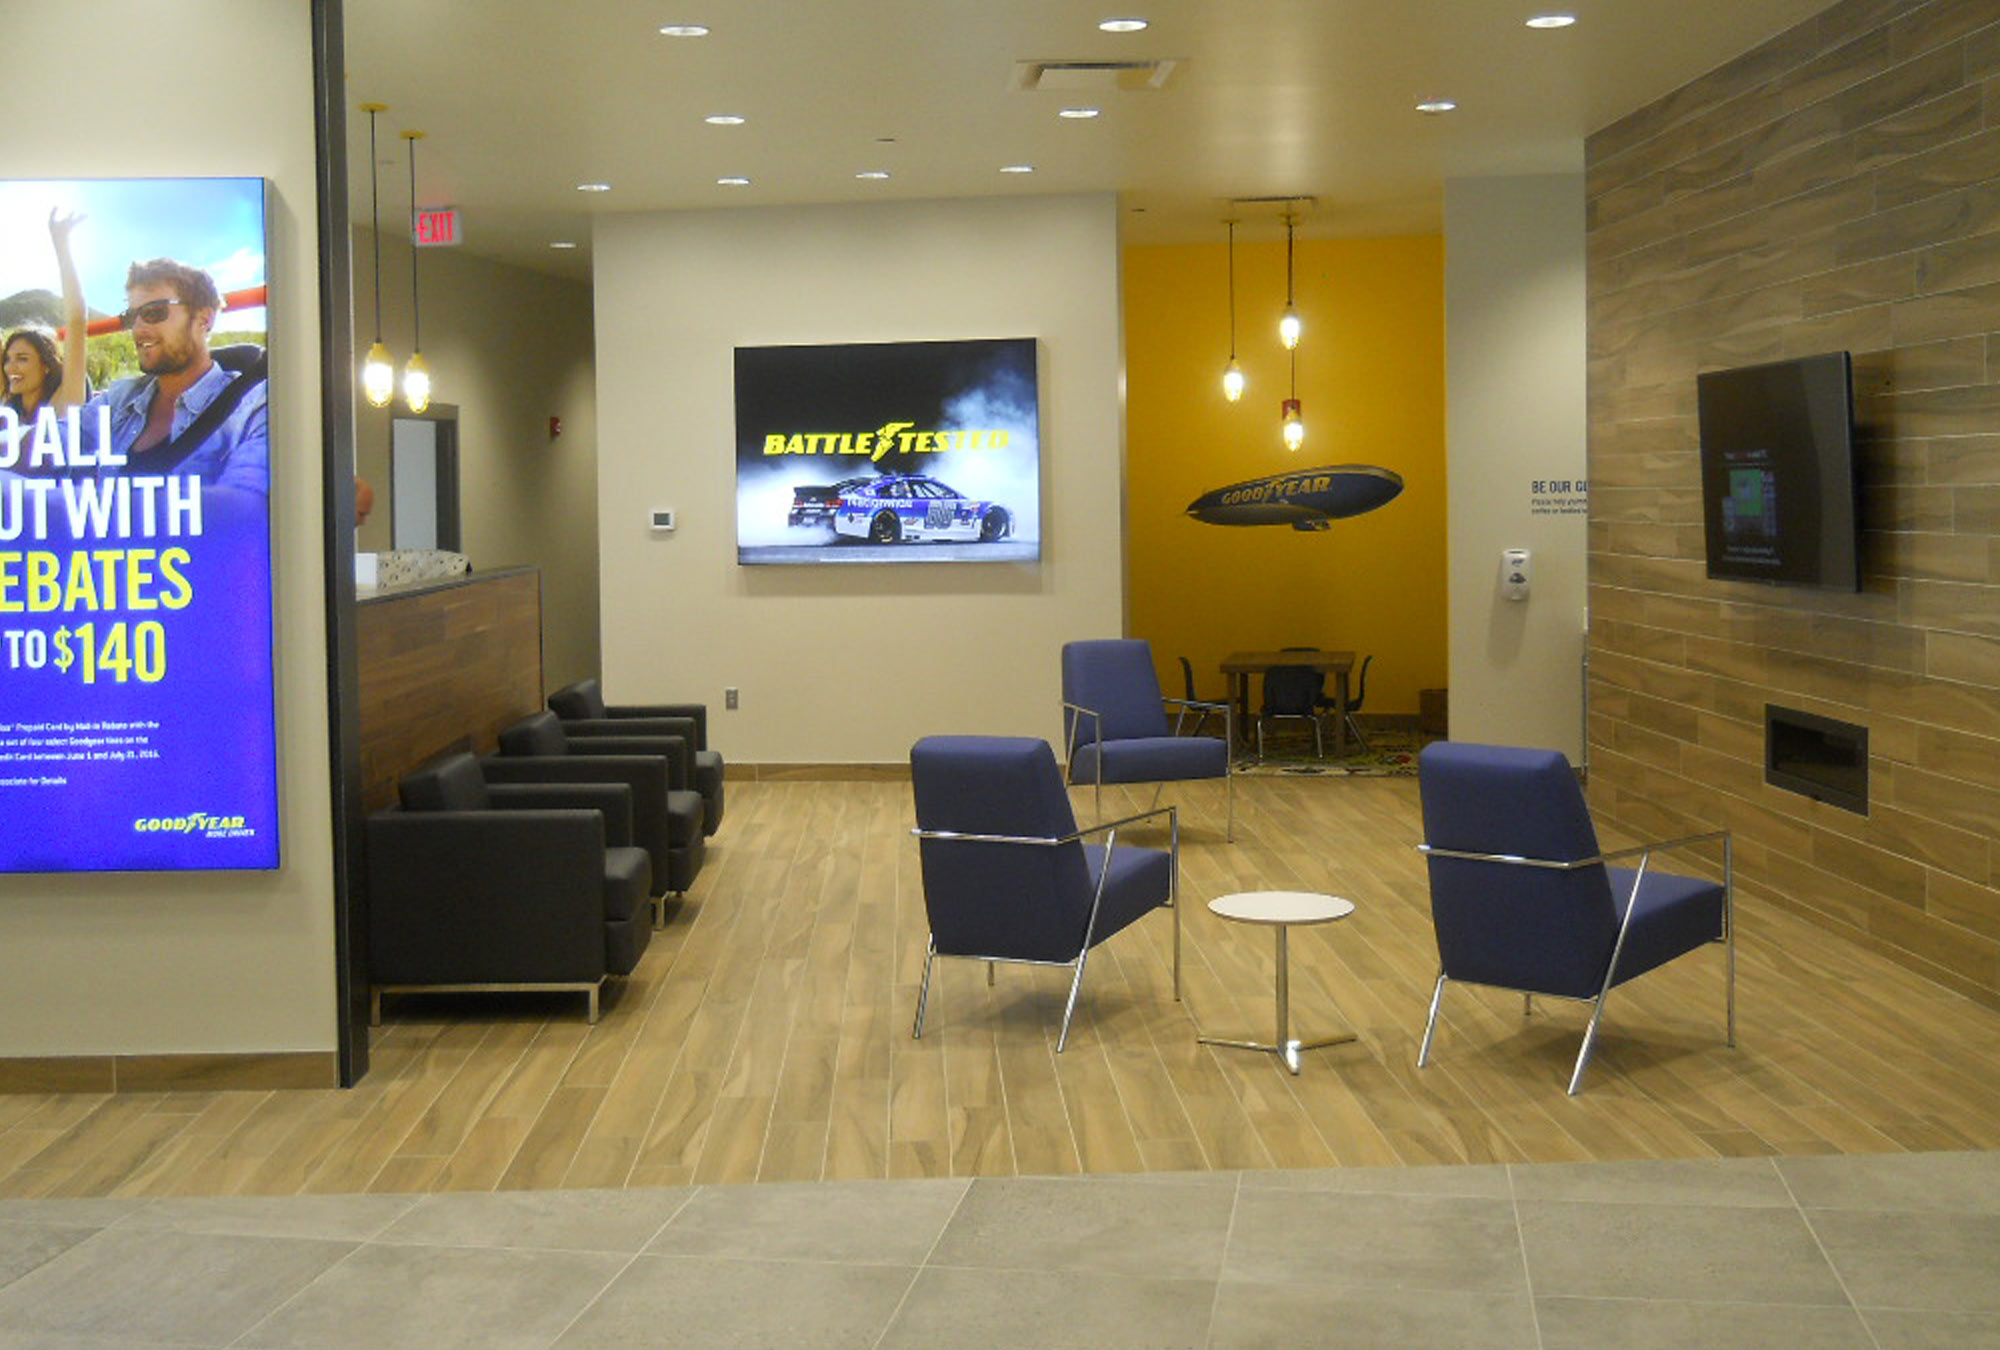 Leading Manufacturing Contractors Goodyear Fairlawn OH Waiting Room by Fred Olivieri